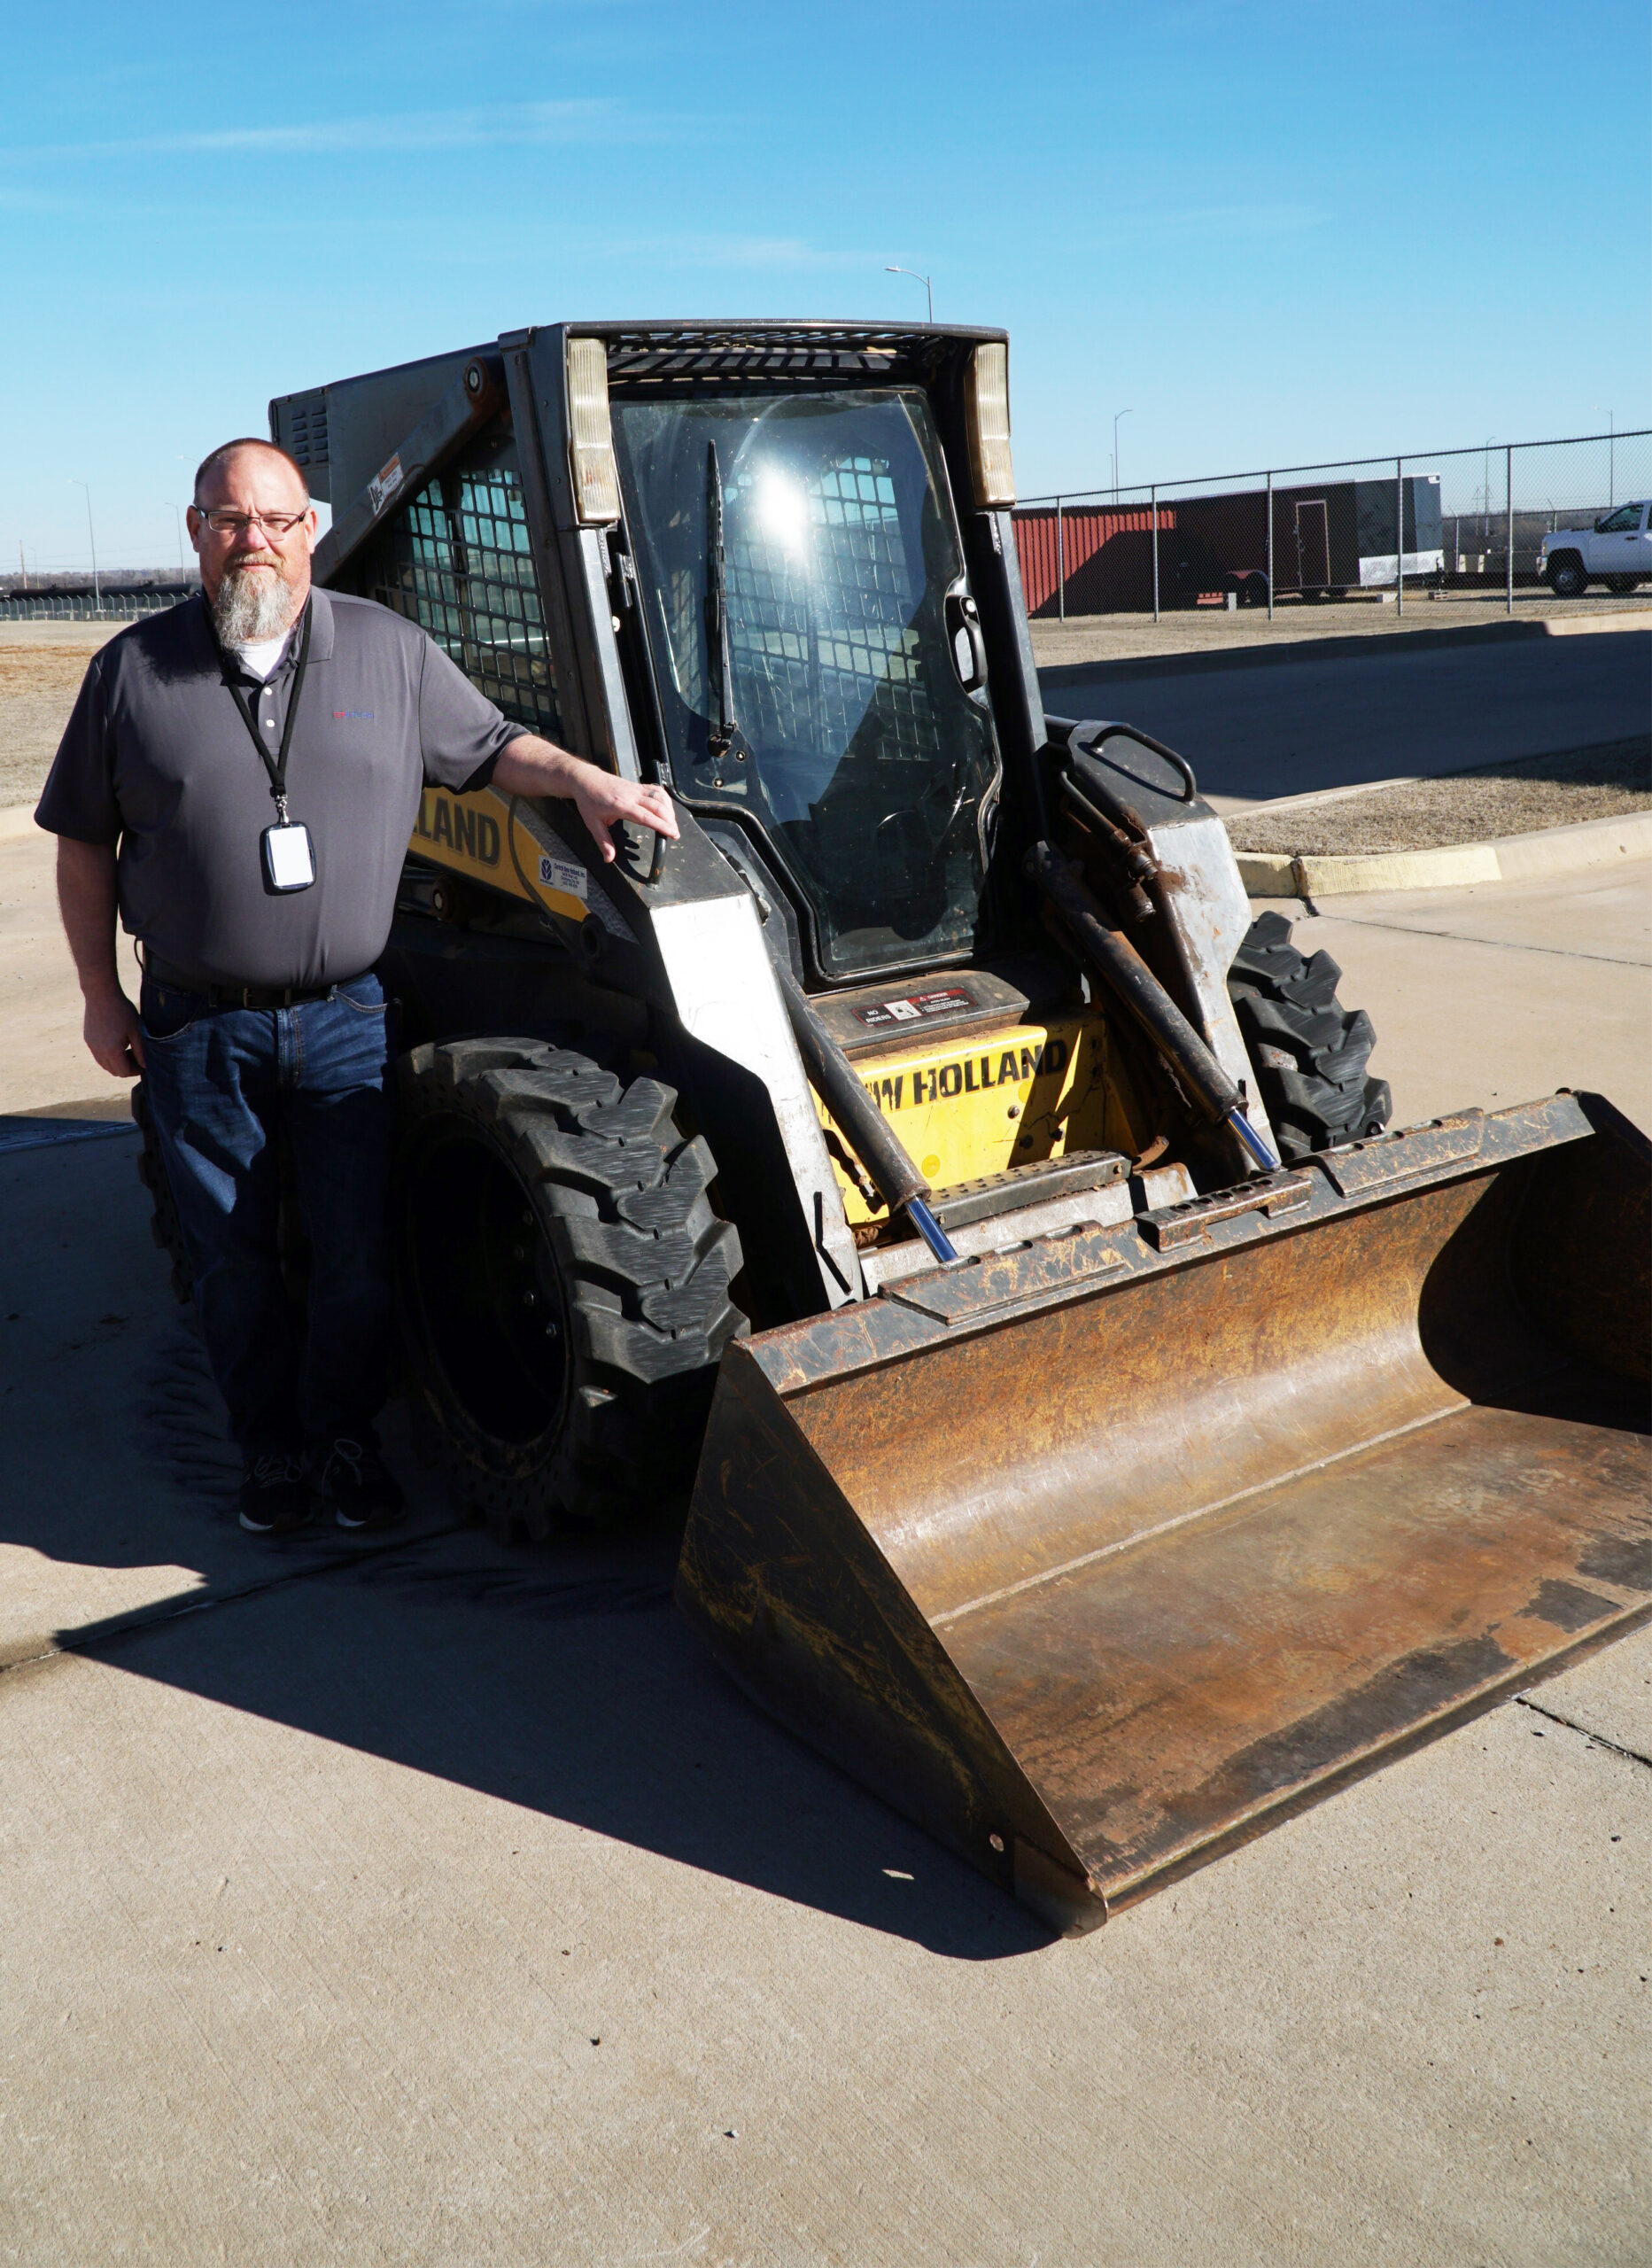 Instructor with skid steer